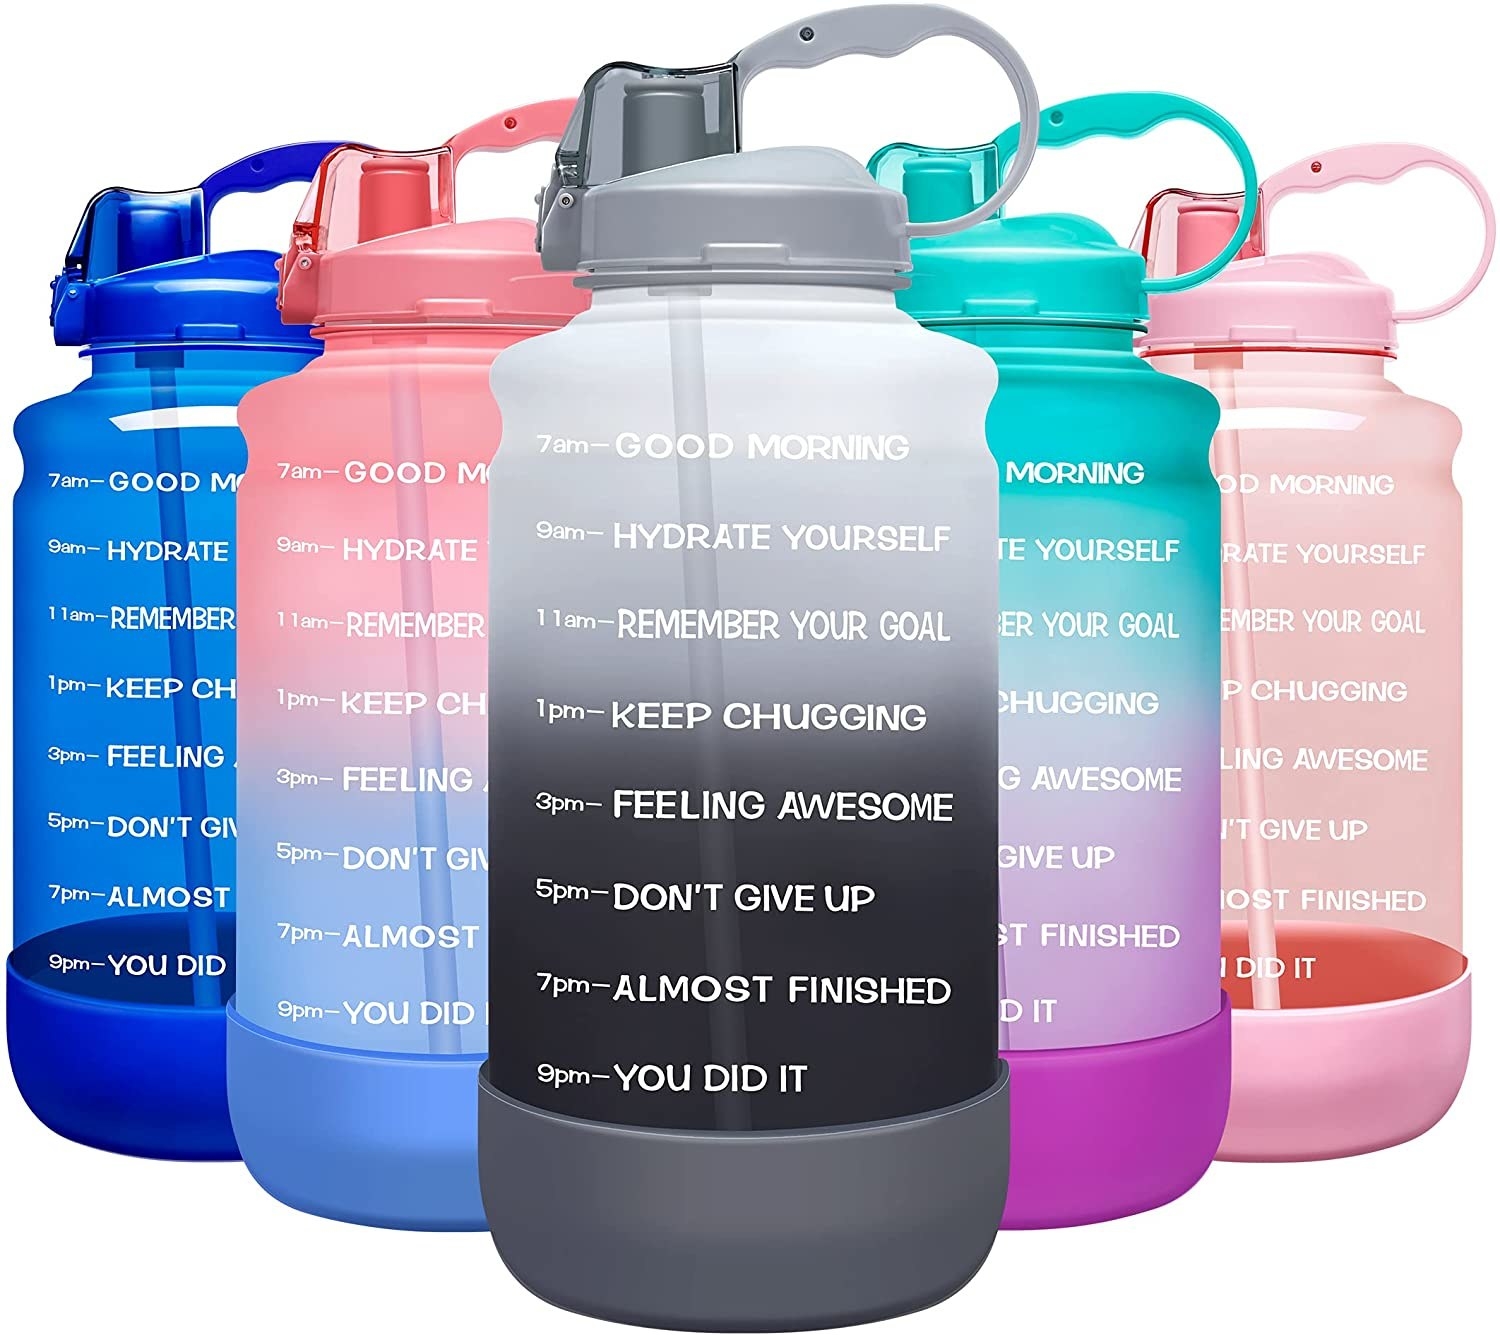 Water bottles with times of day and motivational messages on them